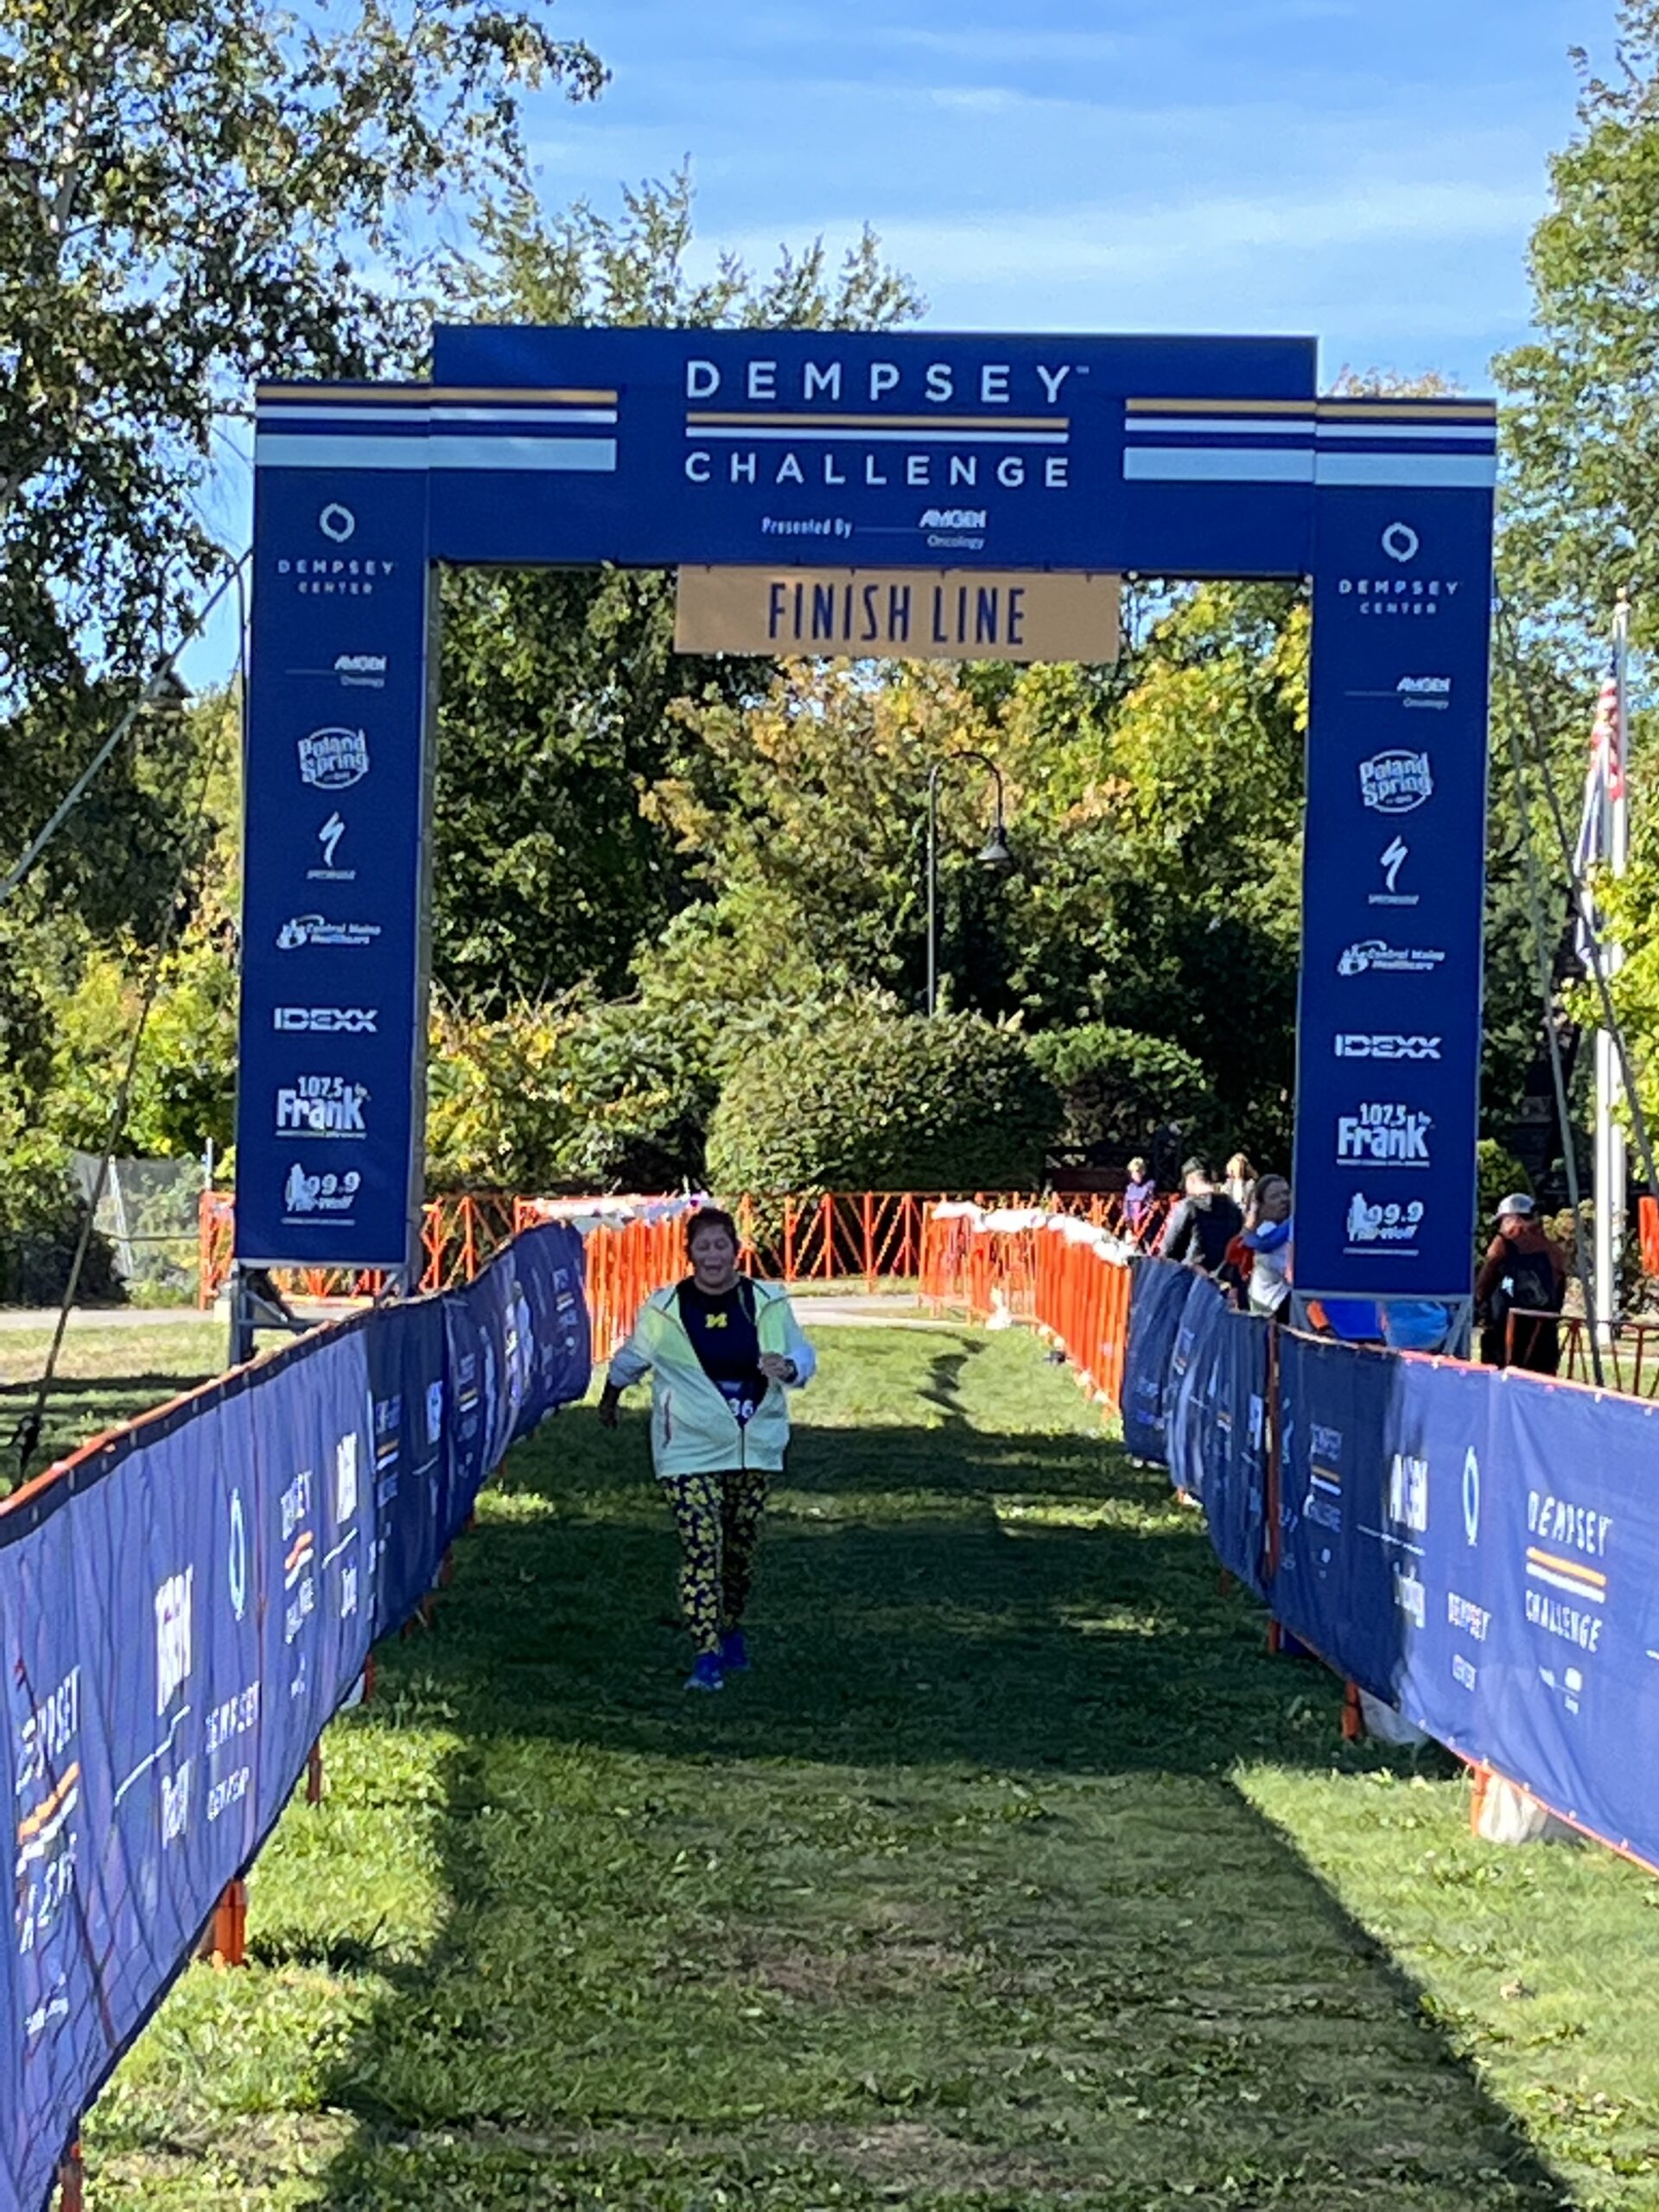 Carole R. Bernstein, ’84, finished the 10K at the Dempsey Challenge in Lewiston, Maine in September 2022.